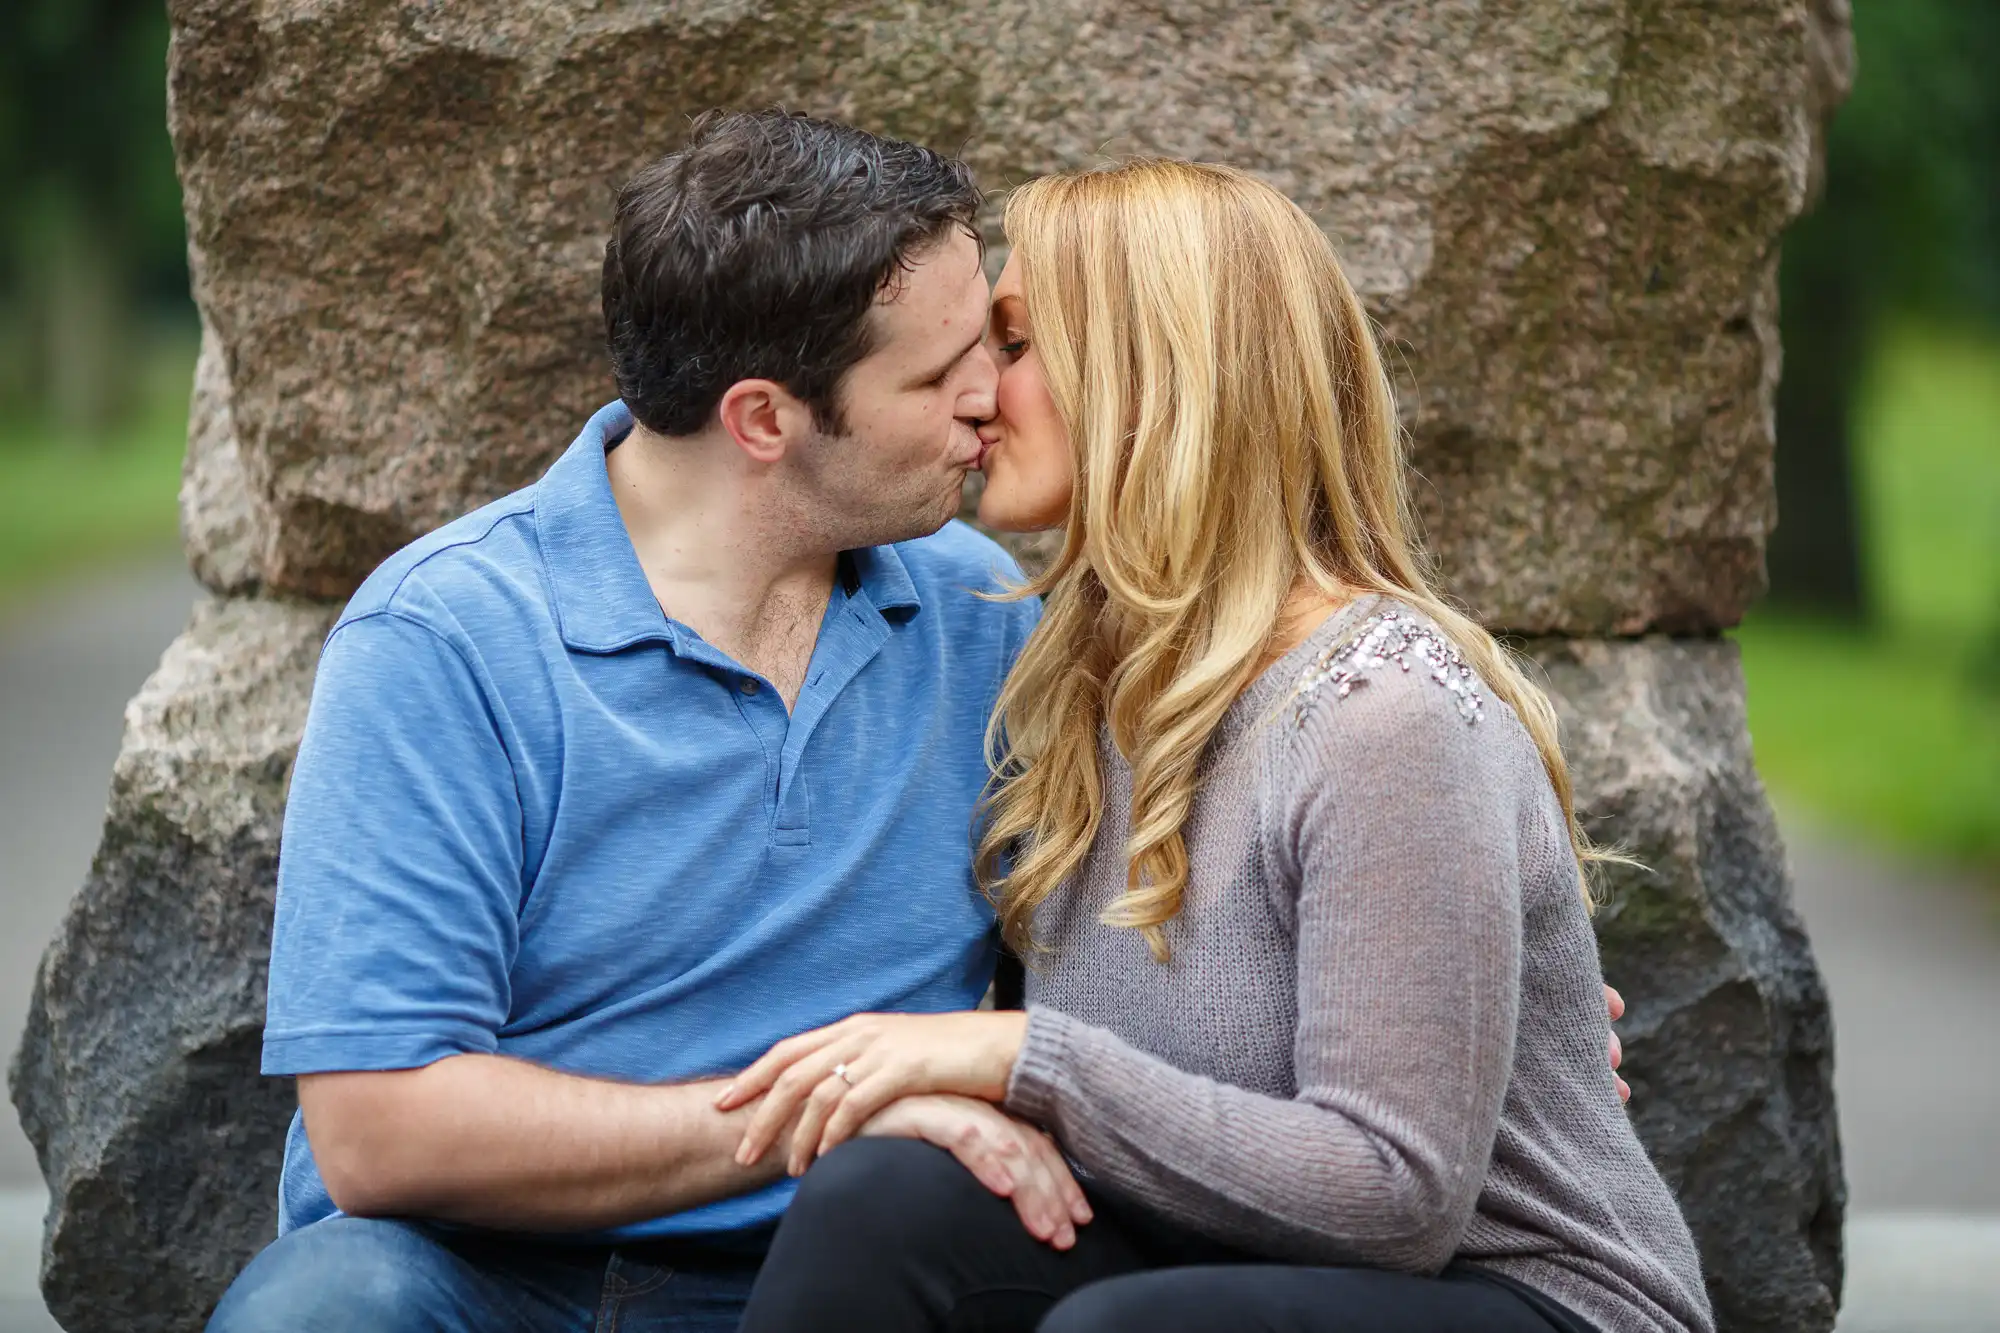 A couple kissing while seated on a bench in a park, with a large rock in the background. they are both wearing casual shirts.